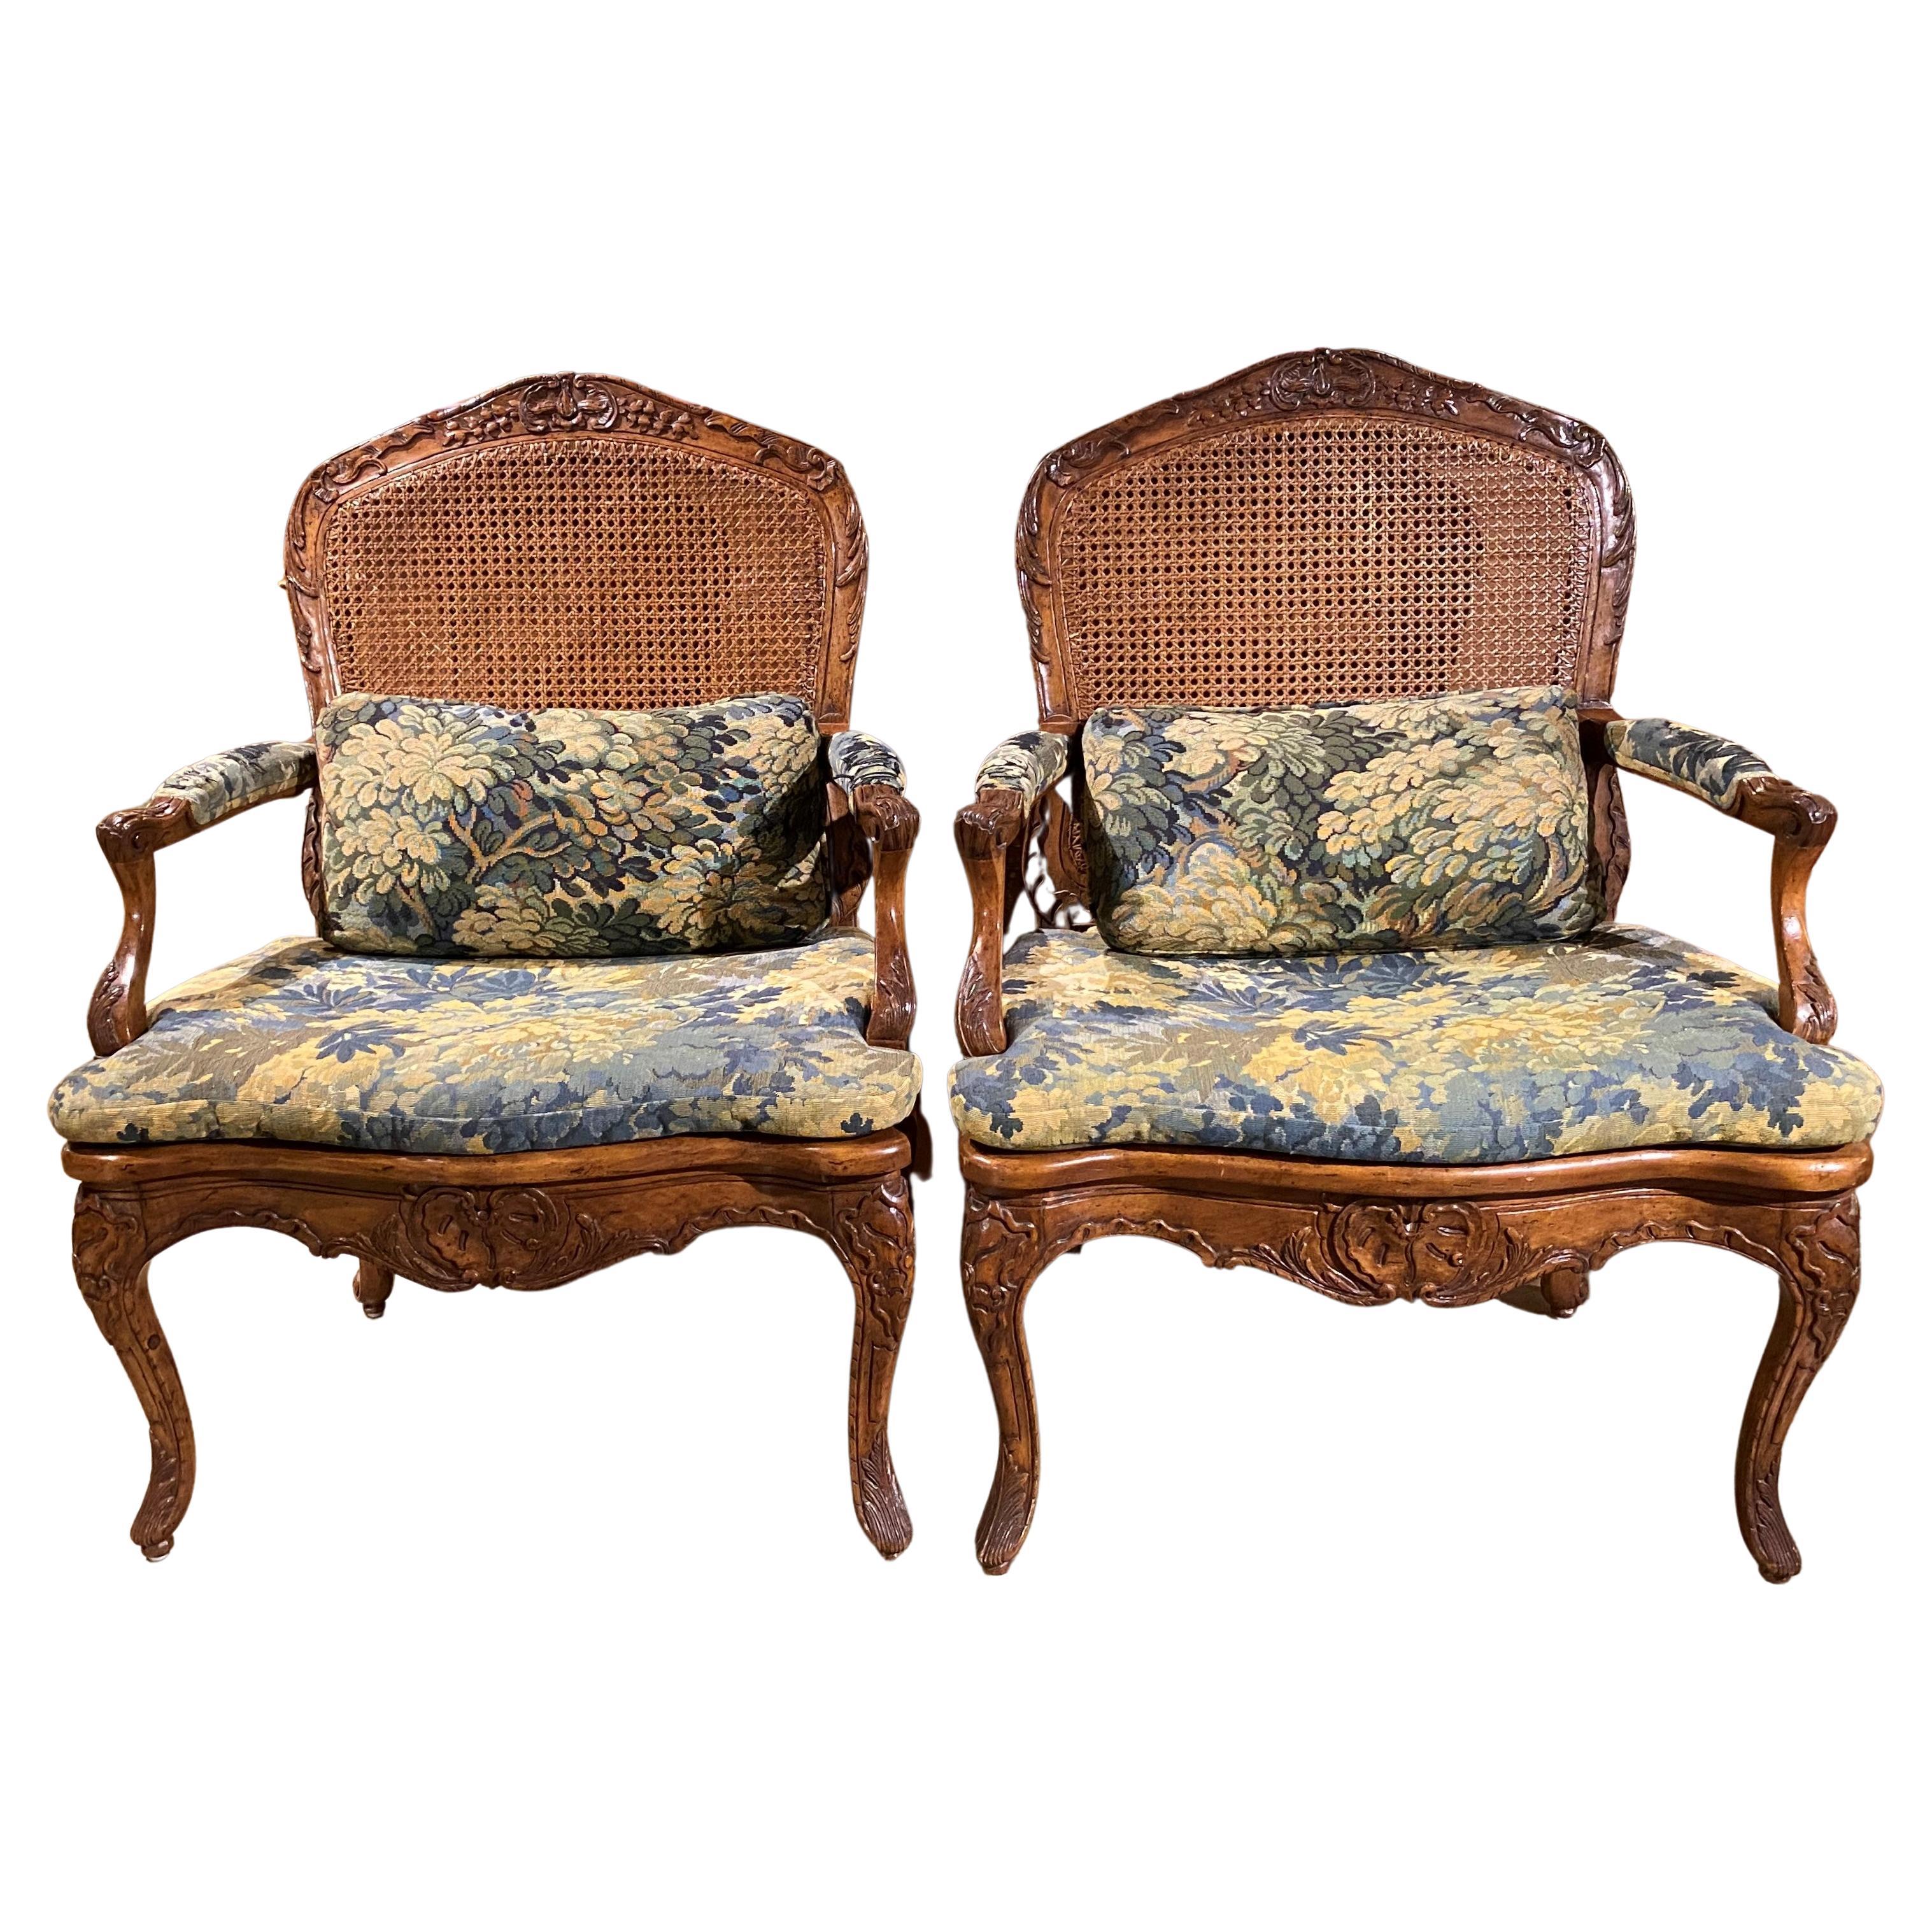 Pair of Louis XV Style Caned Fruitwood Fruitwood Fauteuils with Upholstery